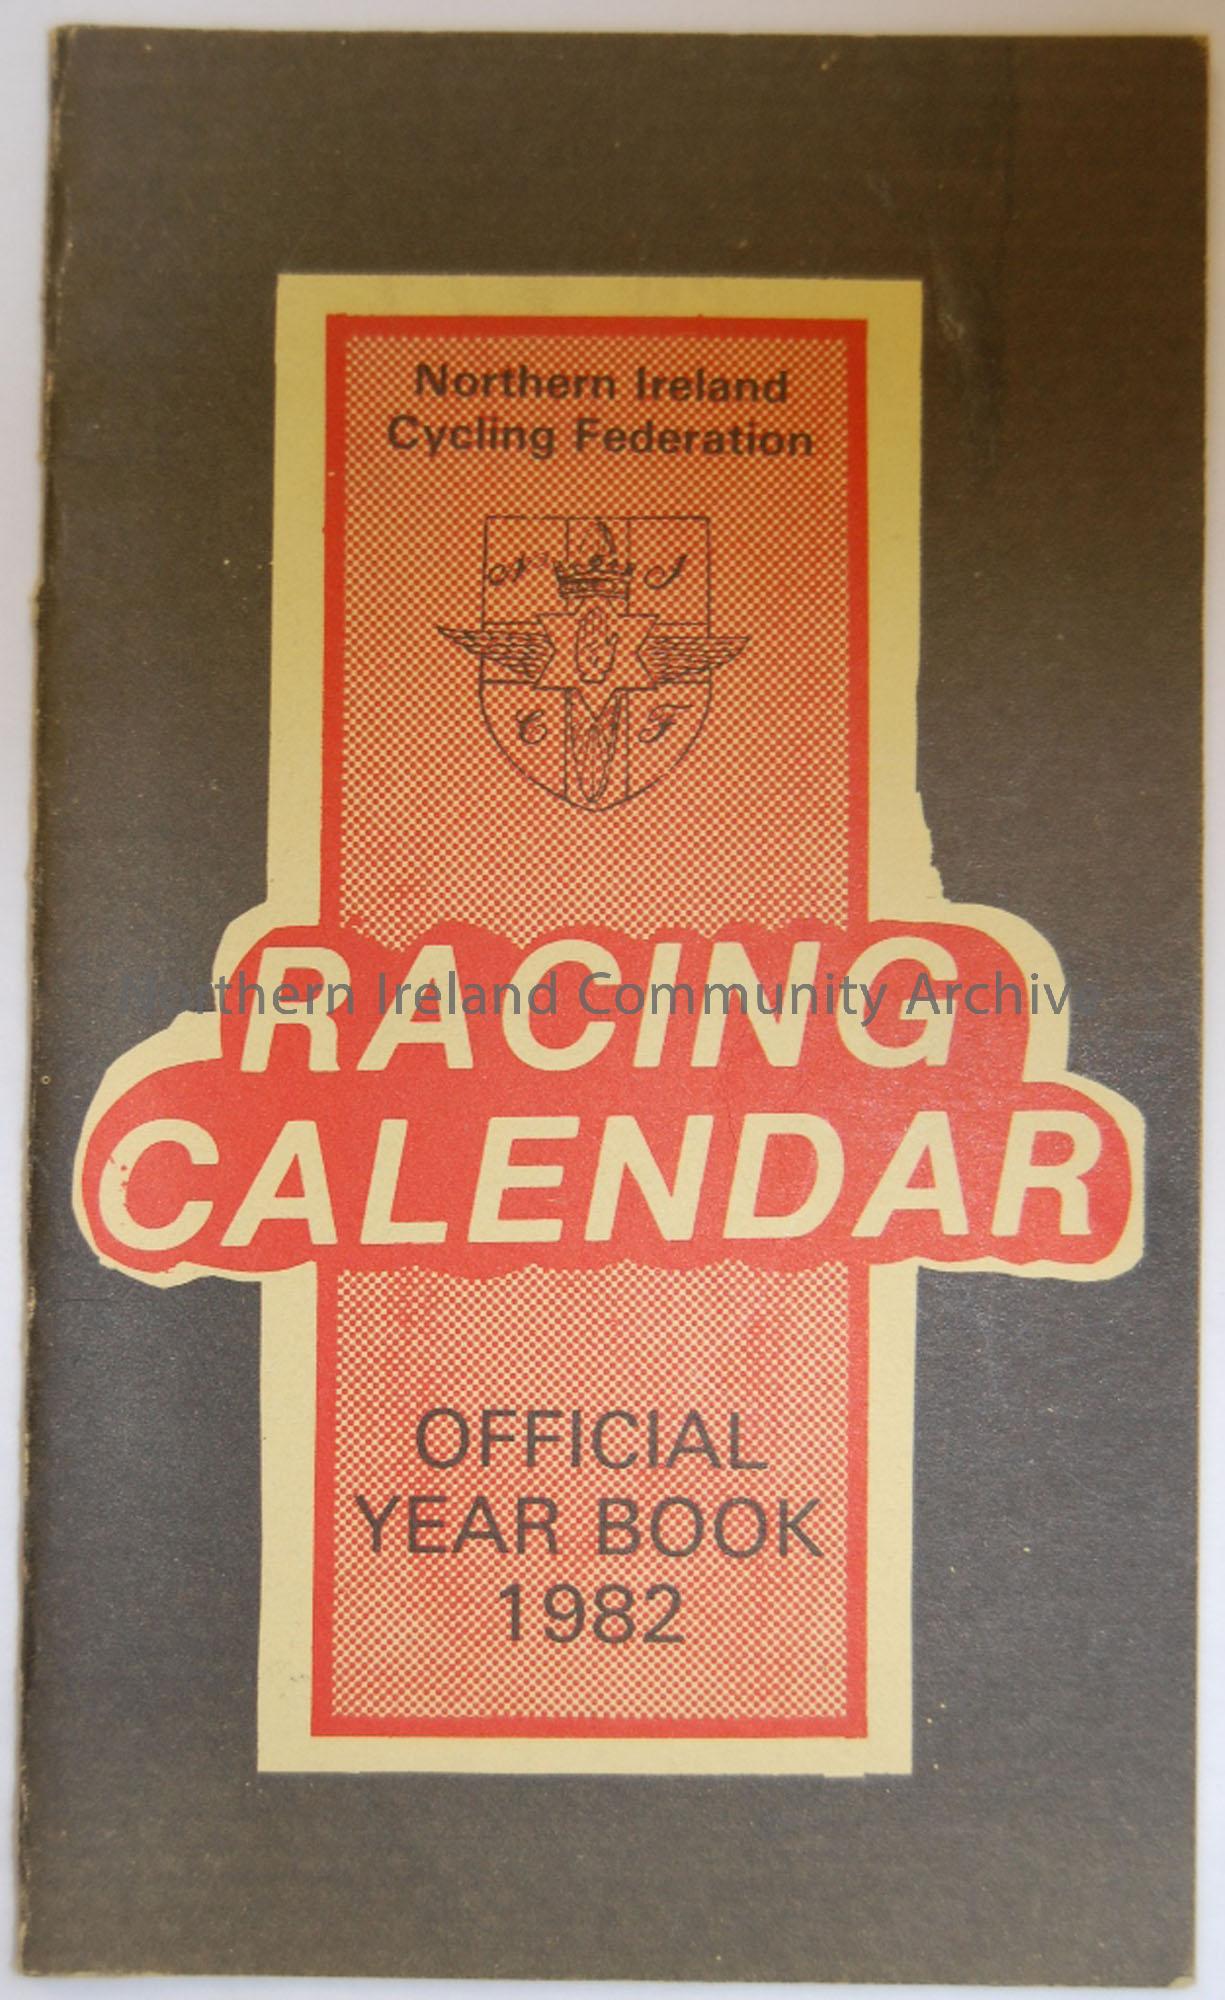 Northern Ireland Cycling Federation racing Calender, official year book 1982